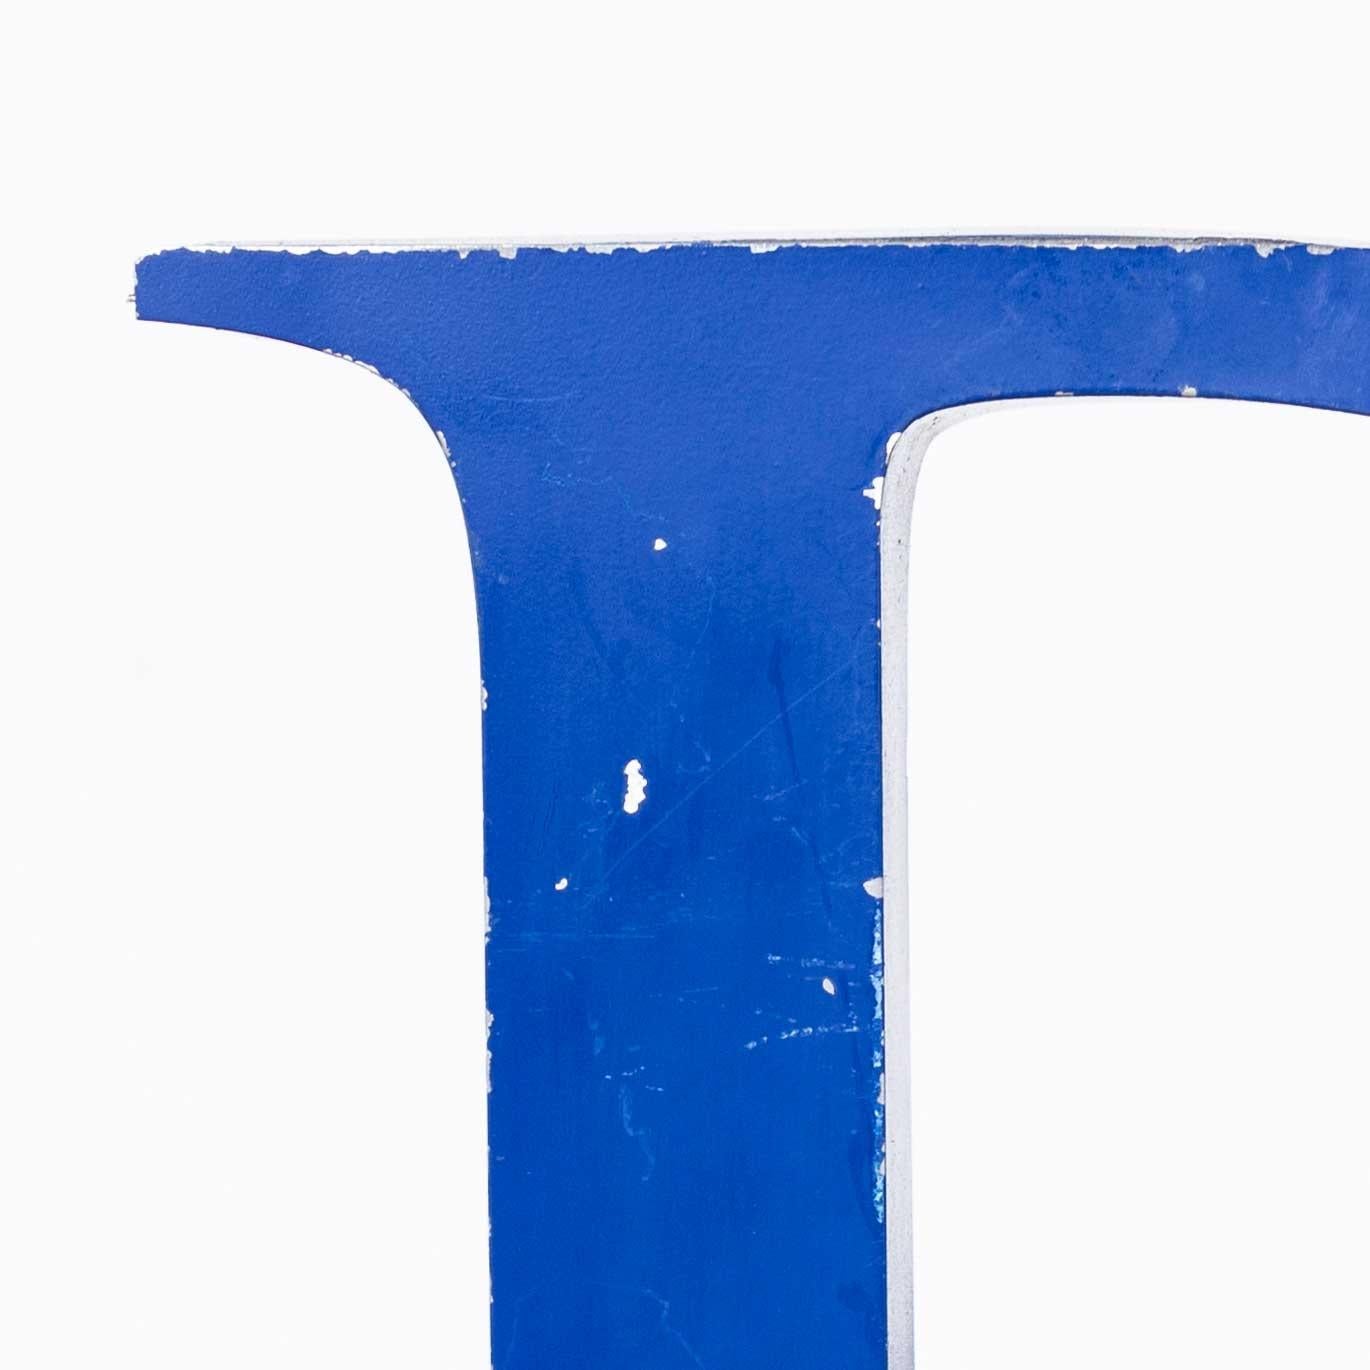 Vintage Blue Metal Letter – Medium R
Vintage Blue Metal Letter. Good sized metal signage letter with faded original blue paint. Size 5x27x27 – D/H/W all cm.

WORKSHOP REPORT
Our workshop team inspect every product and carry out any needed repairs to